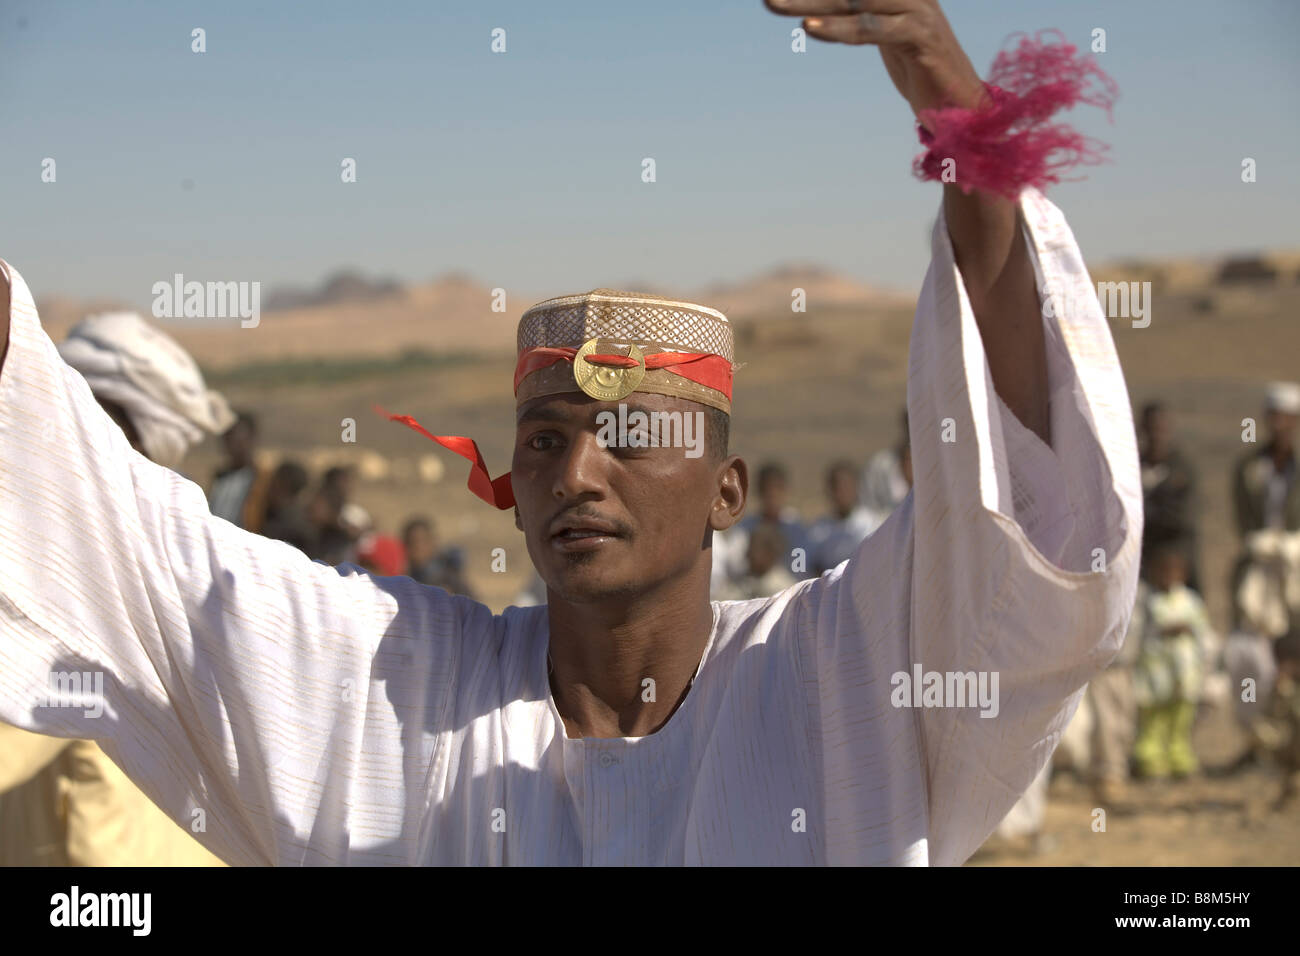 The groom is dancing during muslim marriage ceremony in El Ar village at 4th Nile River catharact region of Nubia in Sudan Stock Photo